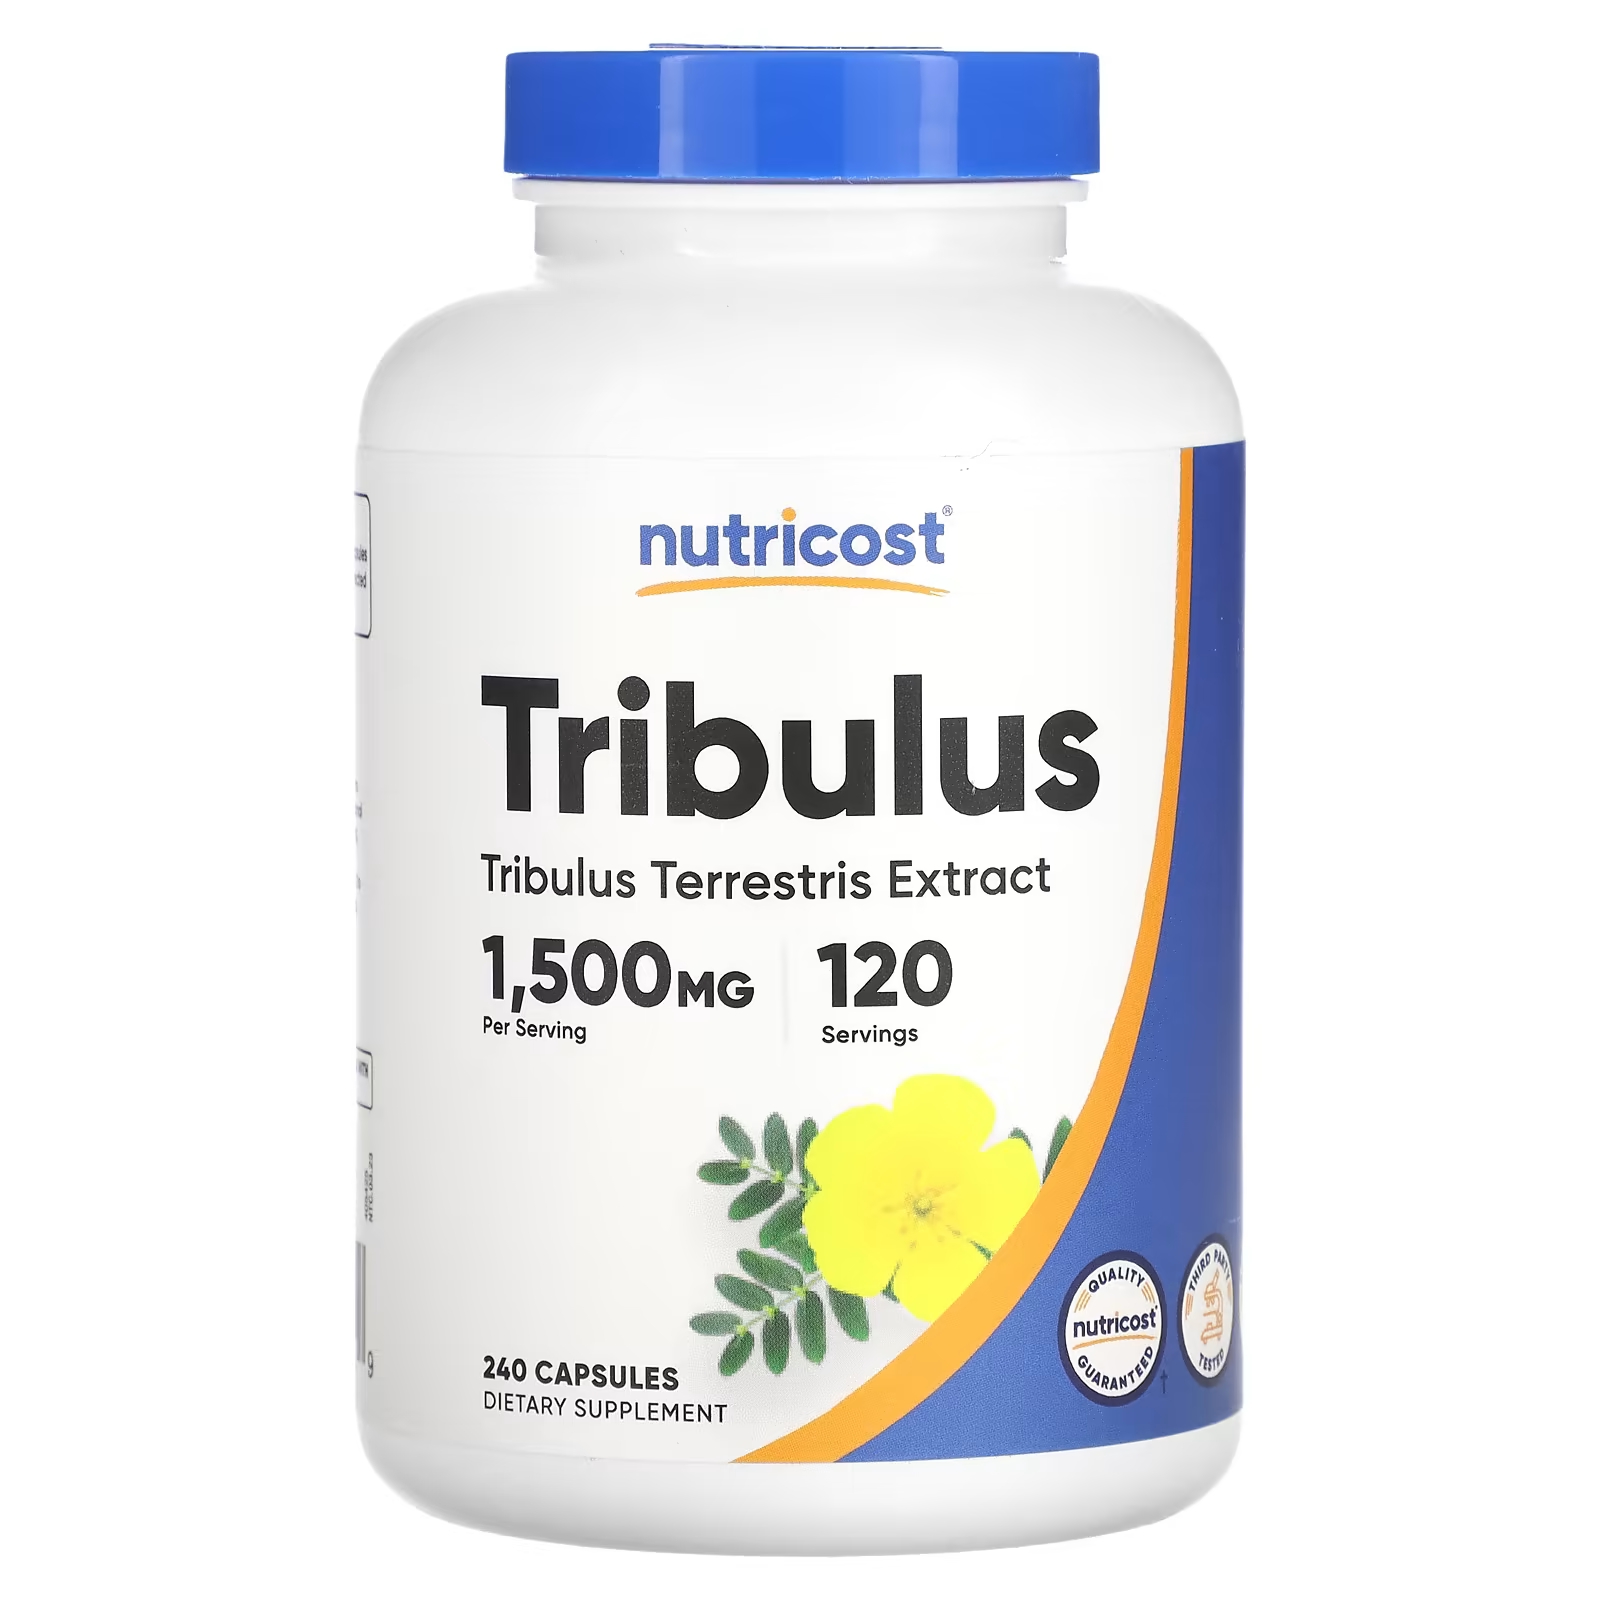 Nutricost Tribulus 1500 мг 240 капсул (750 мг на капсулу) nutricost гамк 750 мг 240 капсул